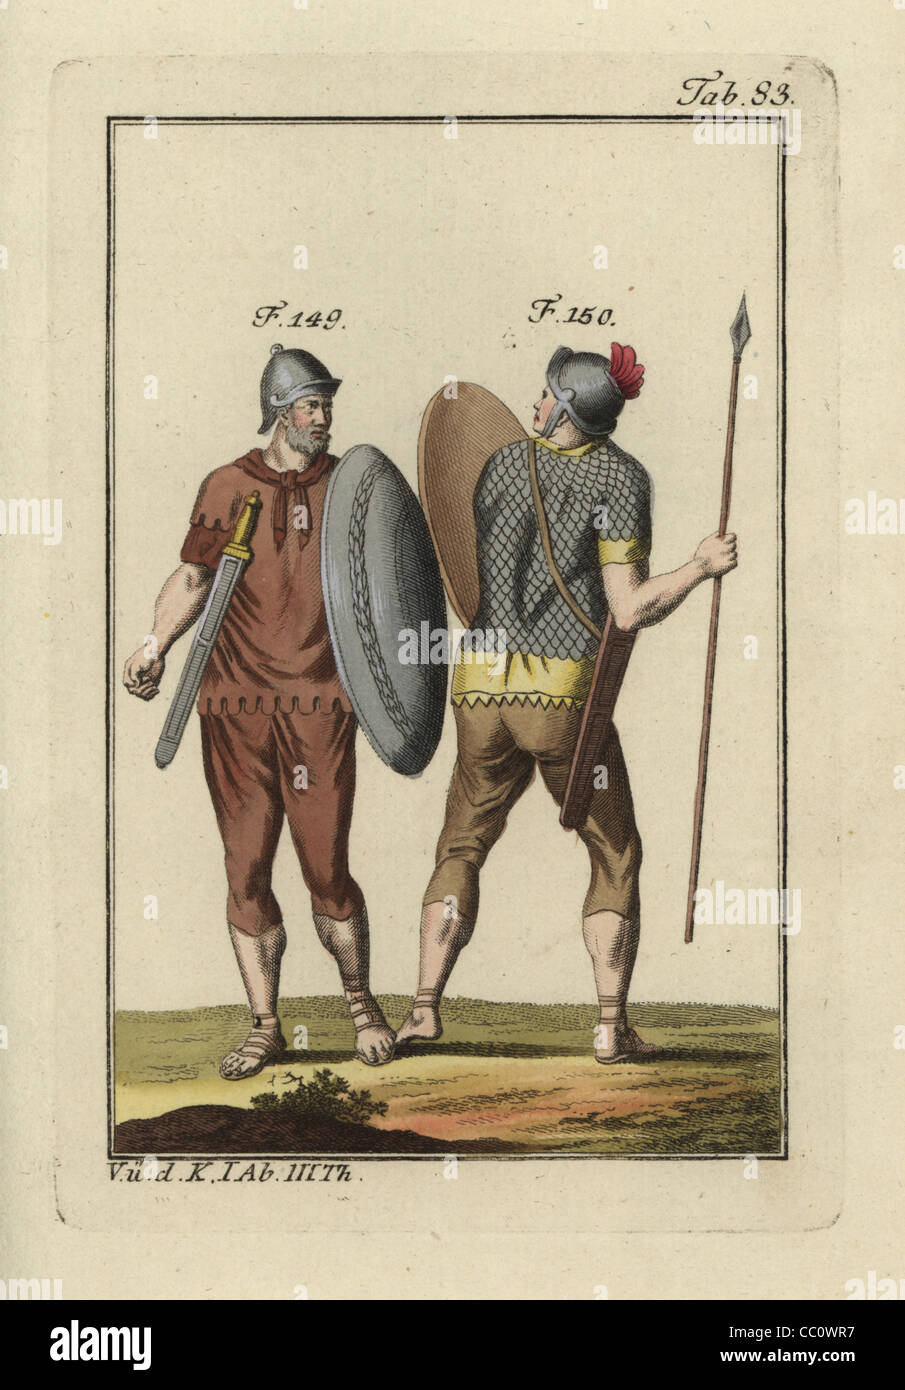 Roman soldiers with shields, swords, helmets. Stock Photo